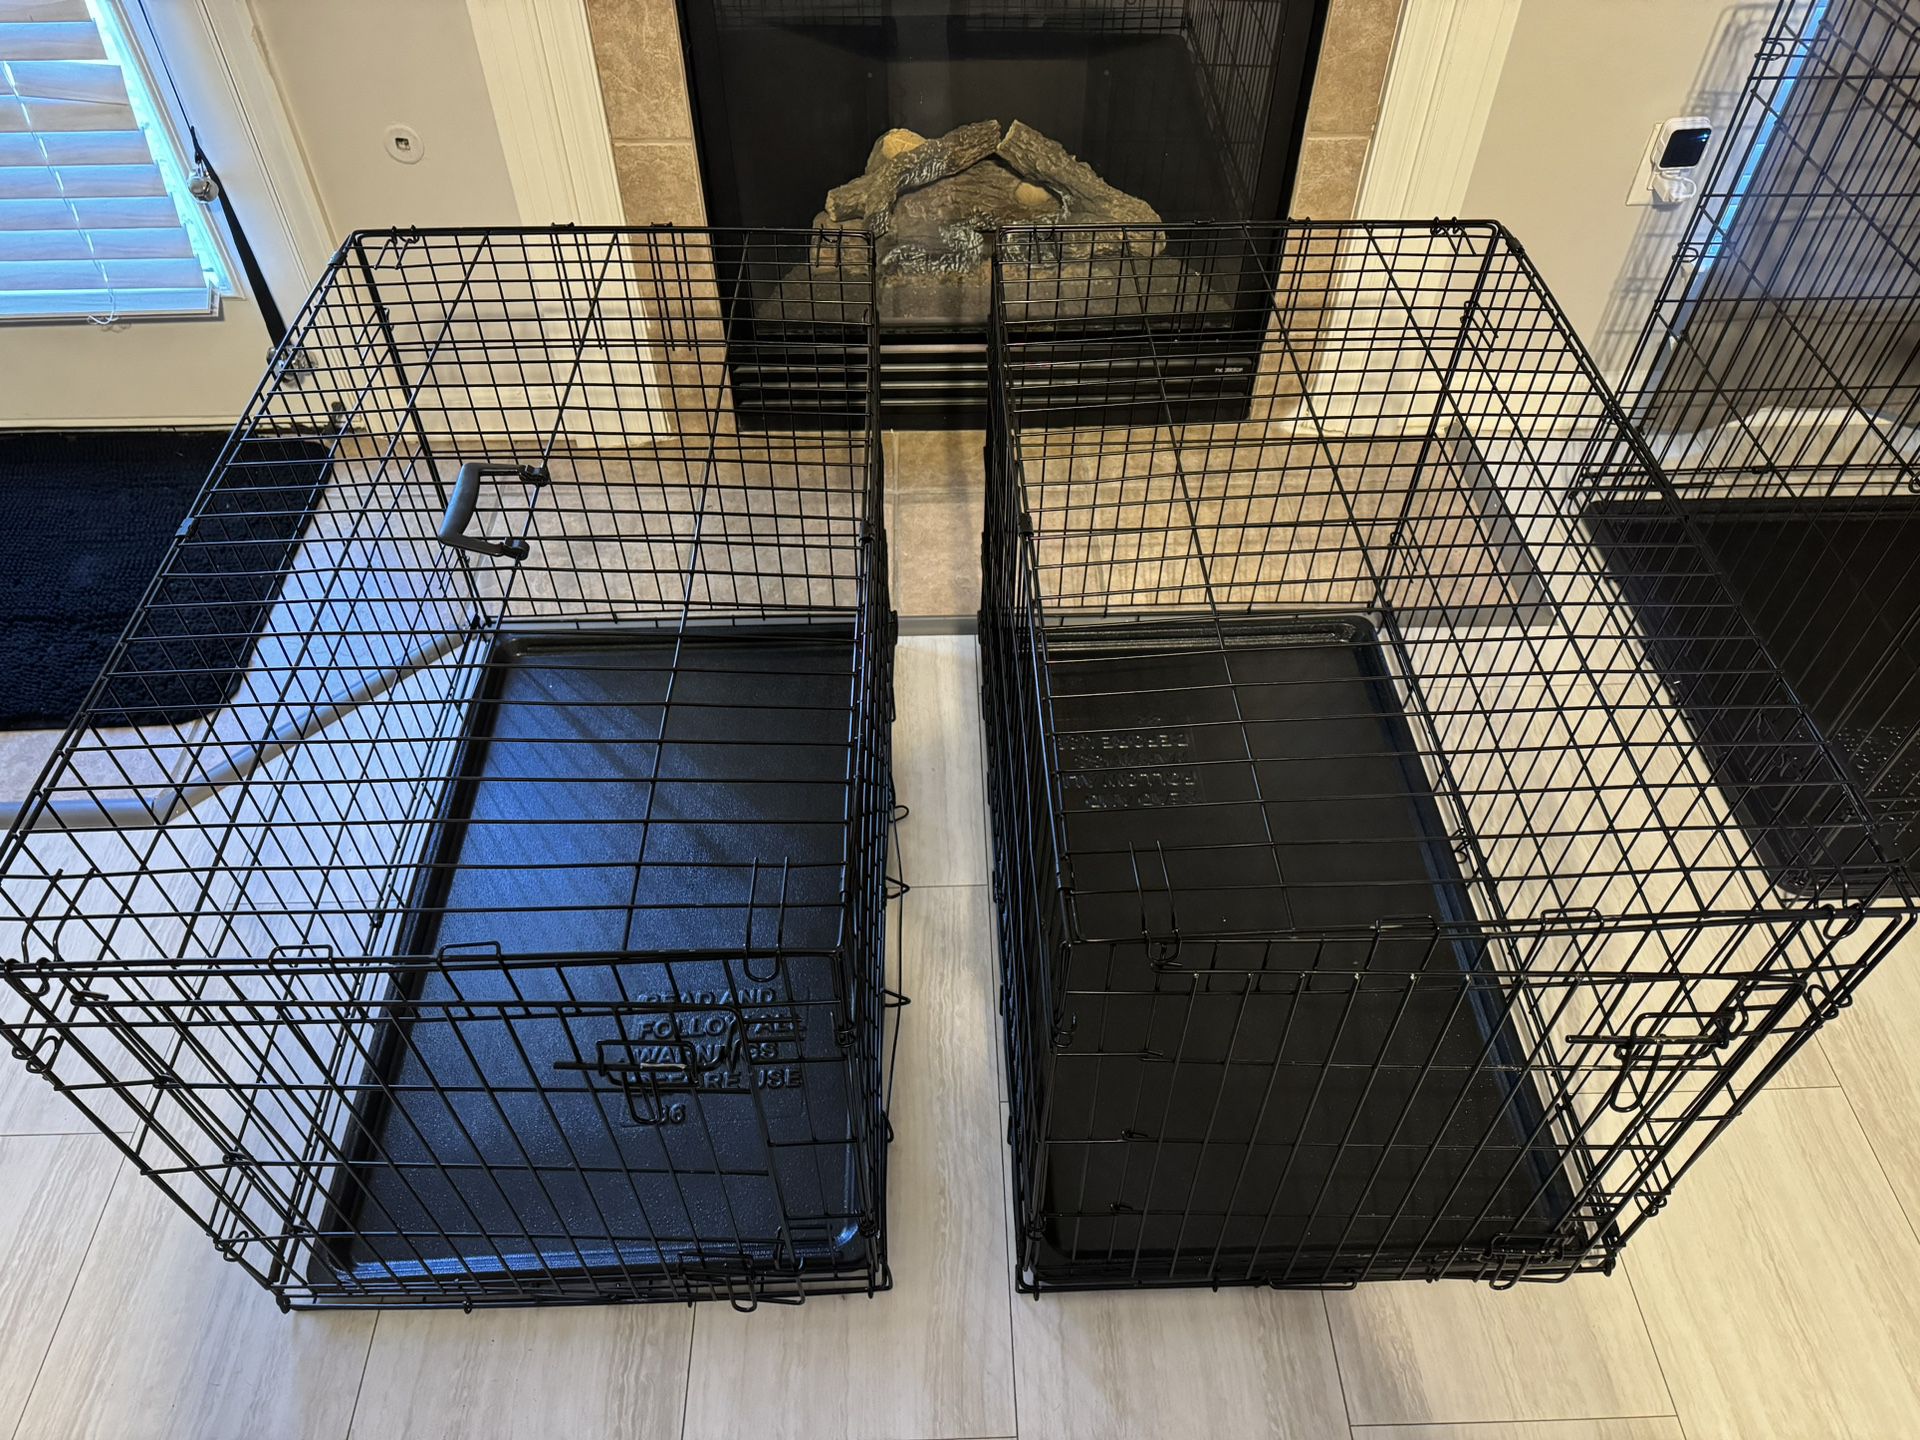 Two (2) 36” Dog Kennels - Great Condition